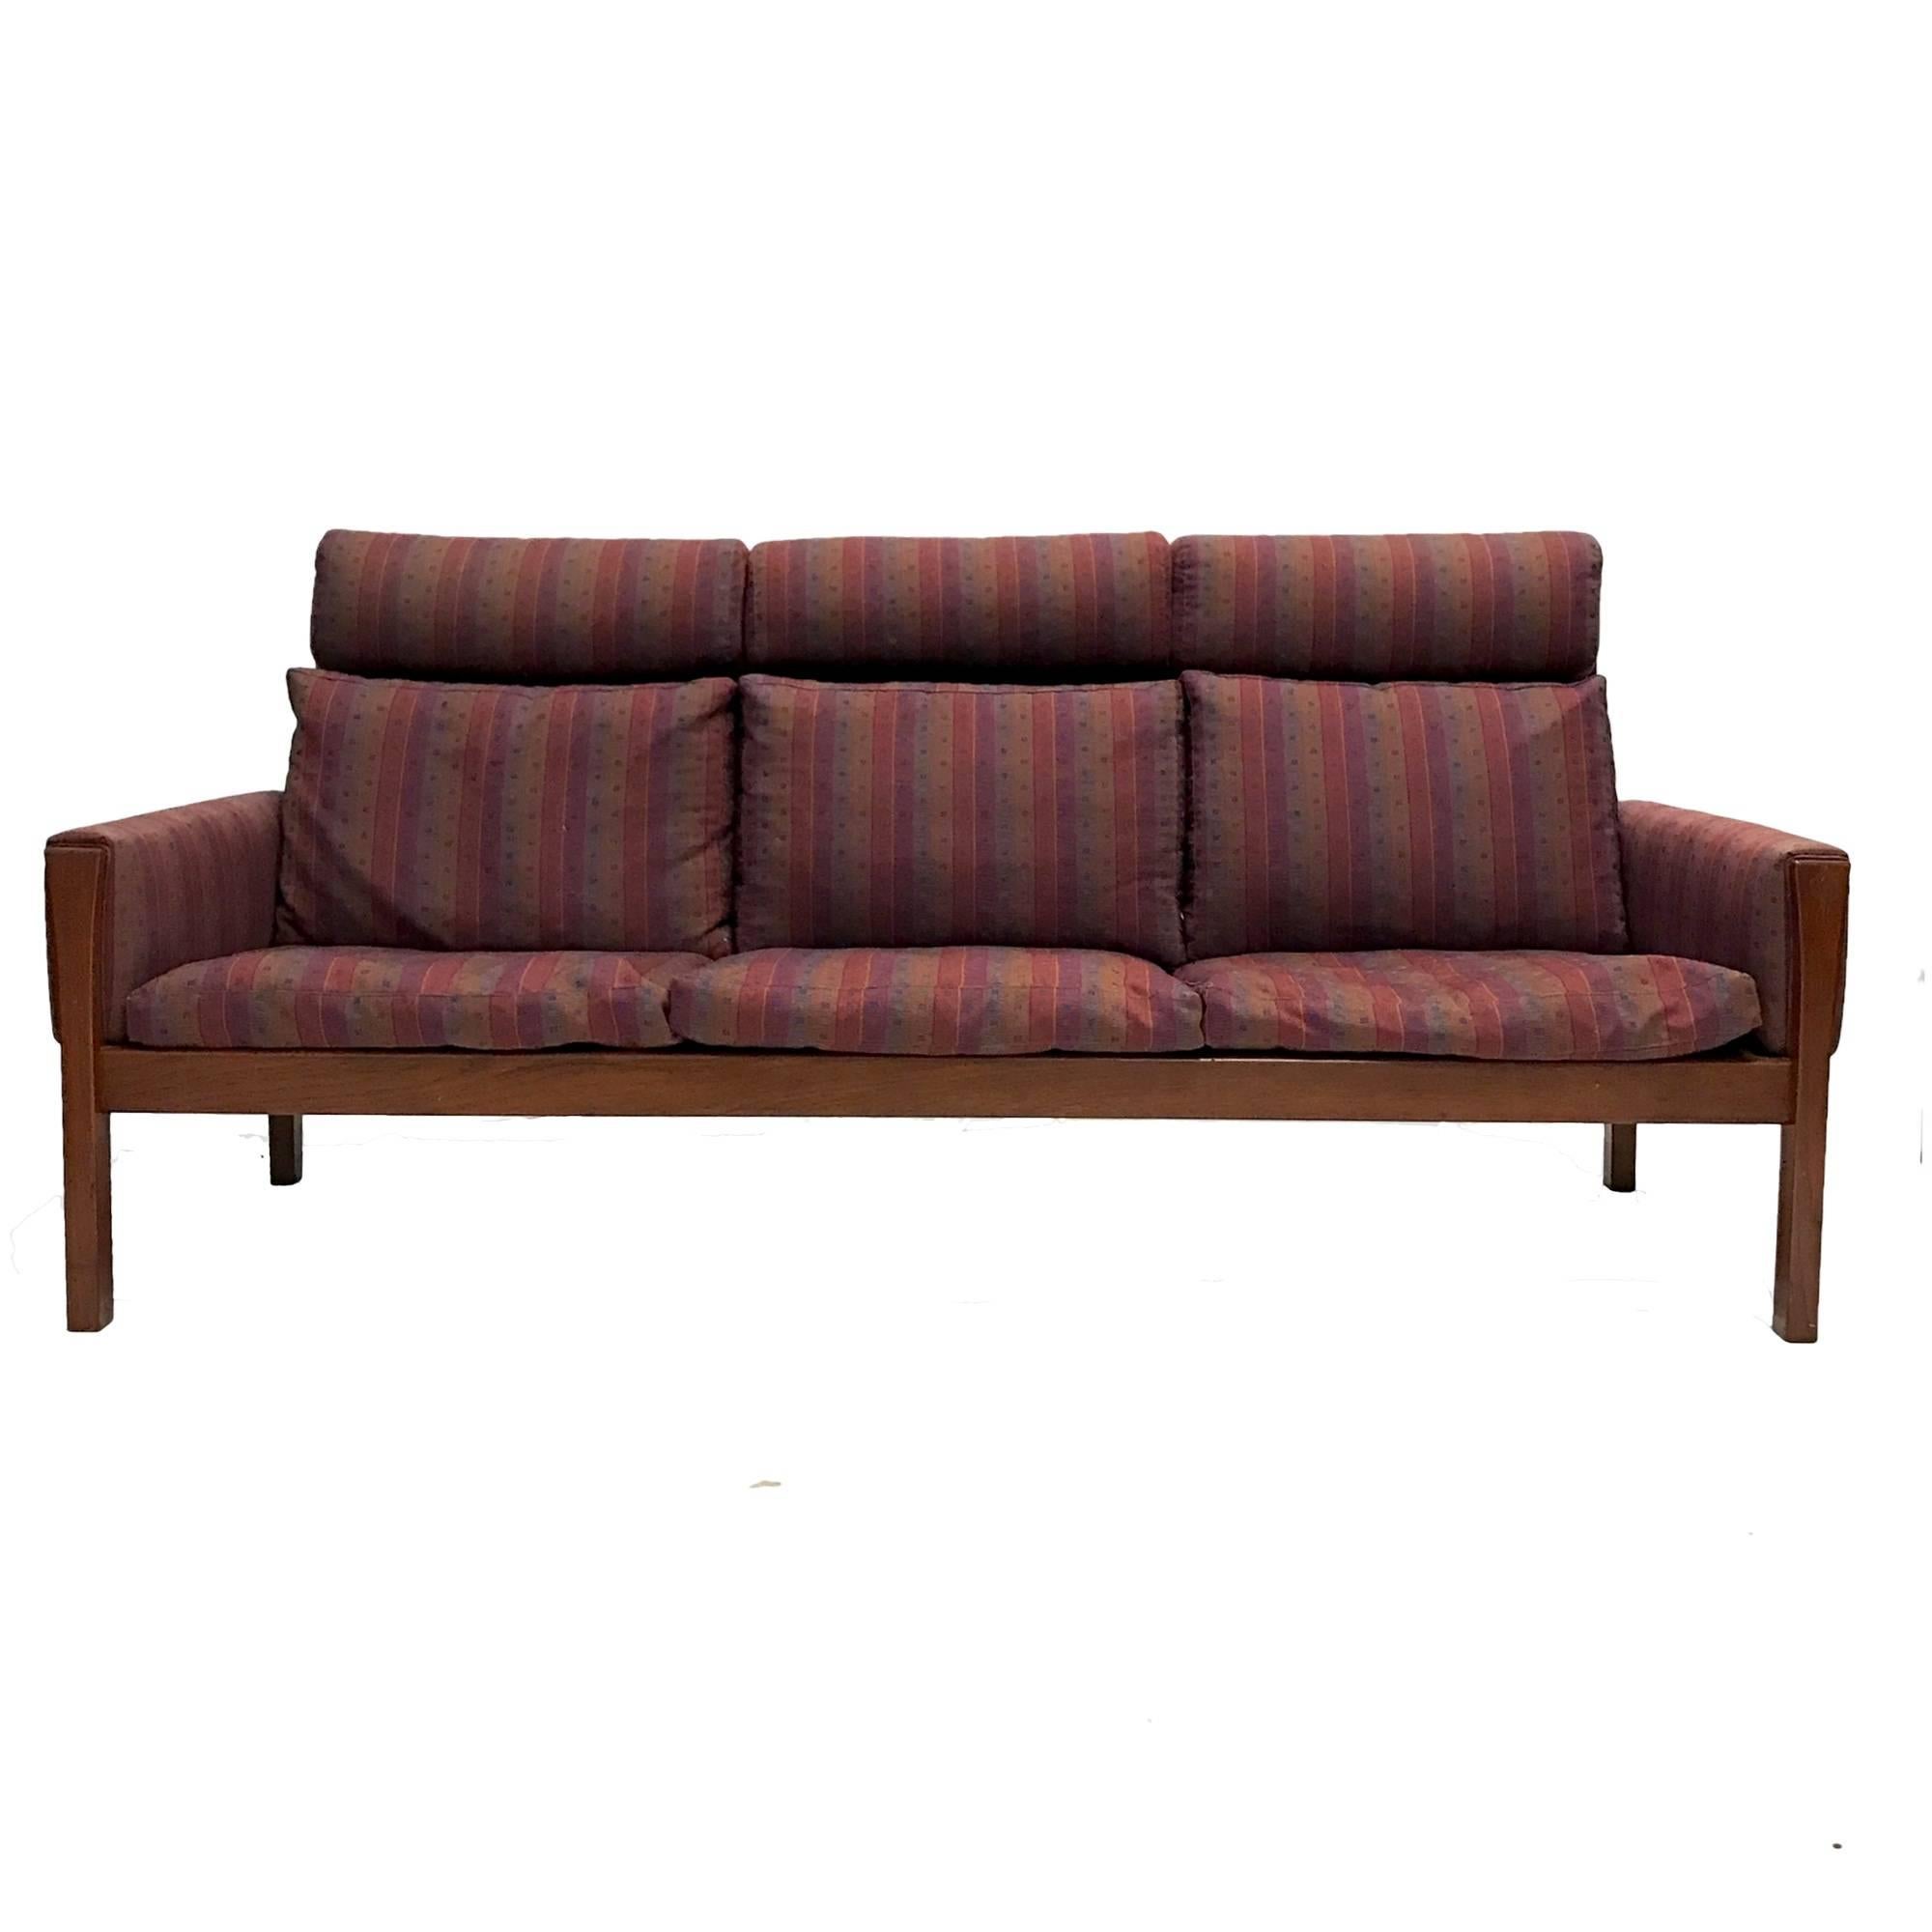 A very rare high back version of A.P. Stolen '62 Sofa' in teak. Price is low enough for reupholstery.